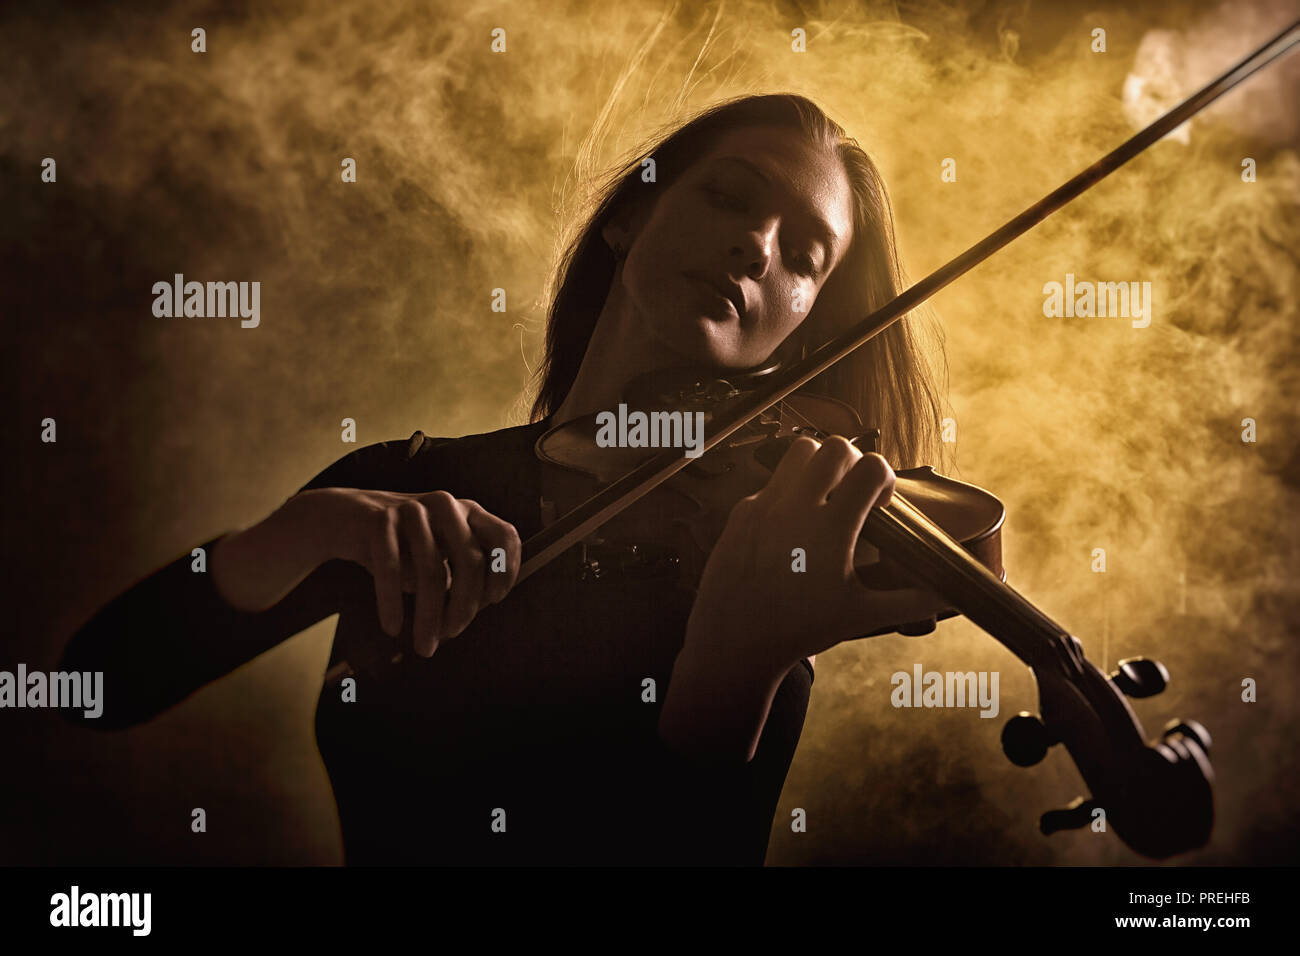 Girl playing the violin against a dark background. Fog in the background. Studio shot Stock Photo